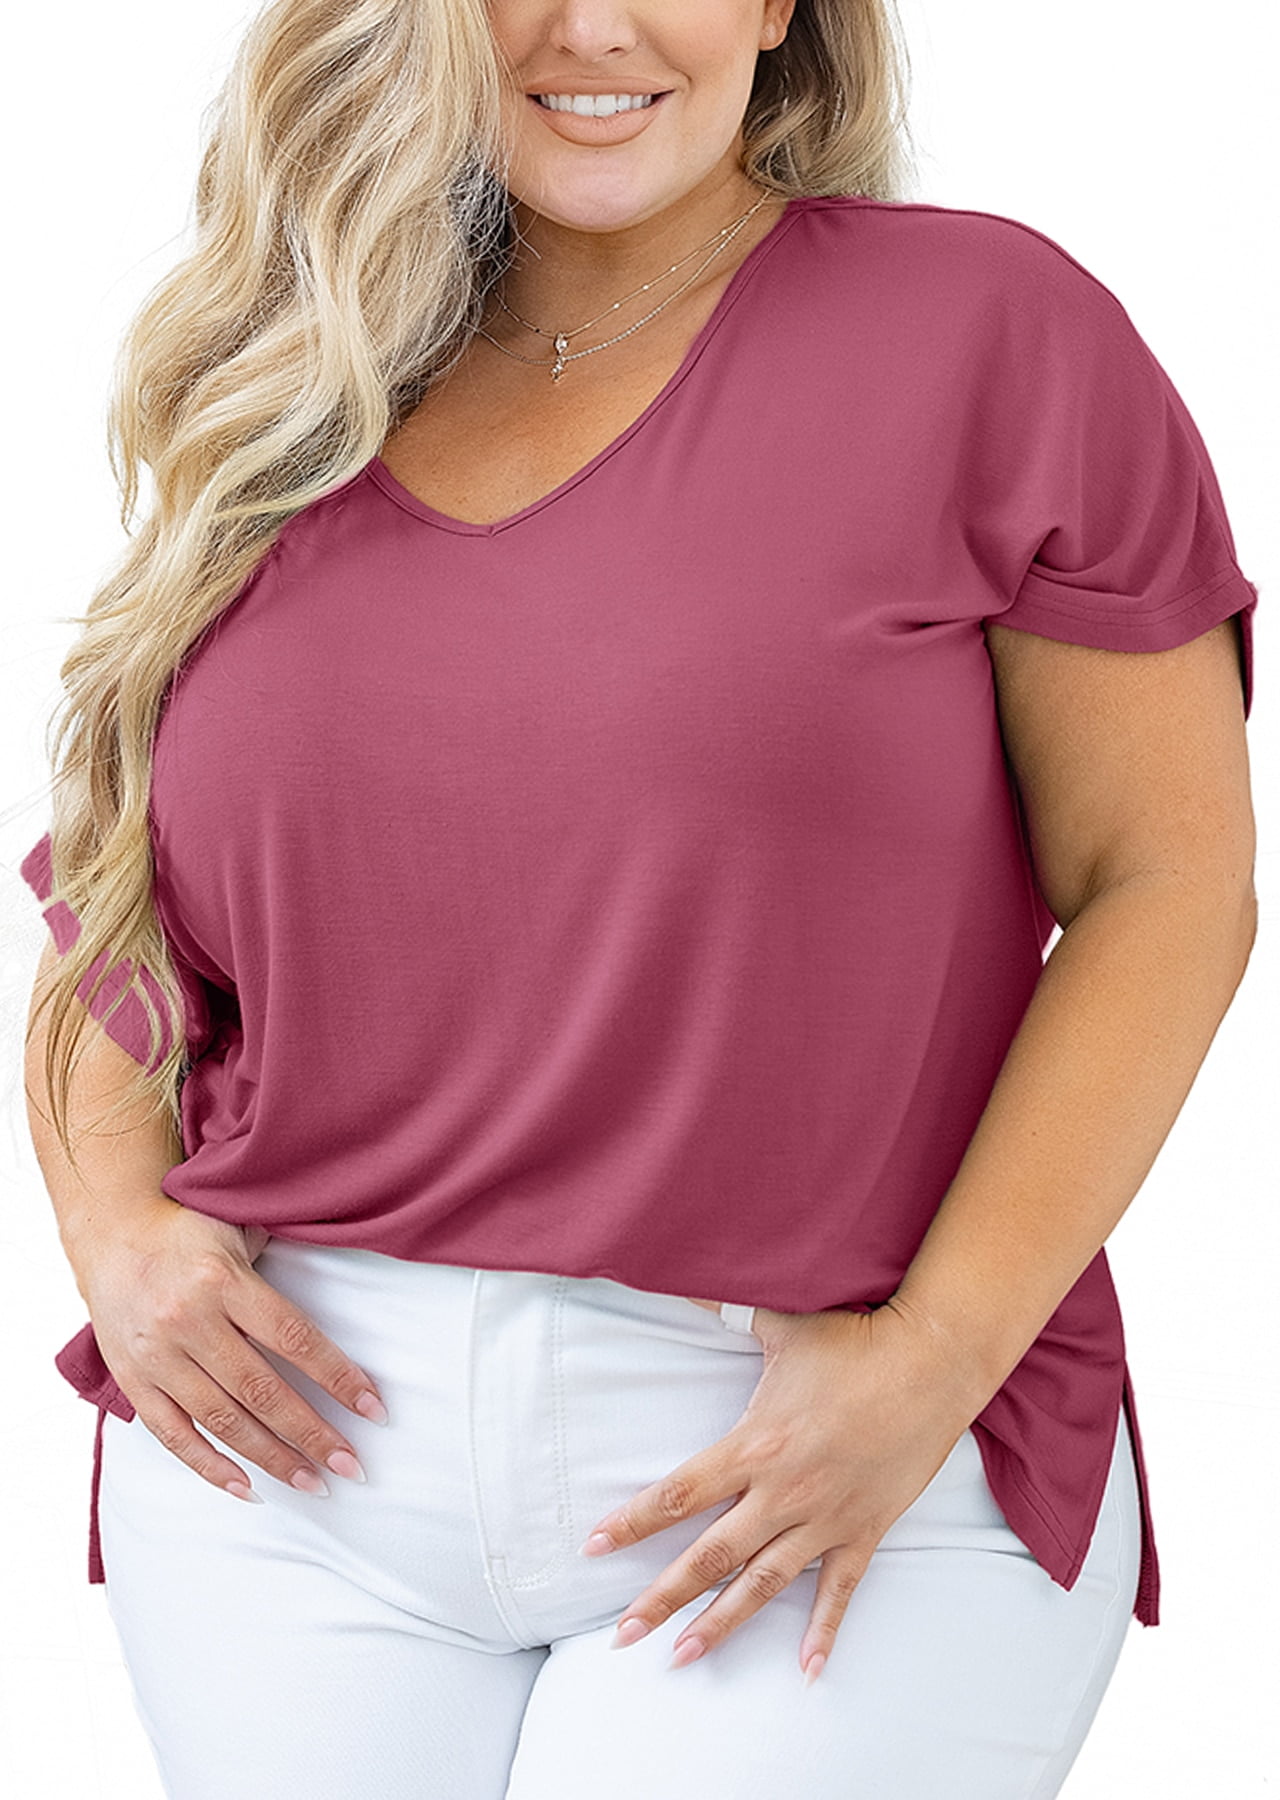 SHOWMALL Plus Size Tops for Women Short Sleeve Burgundy 3X